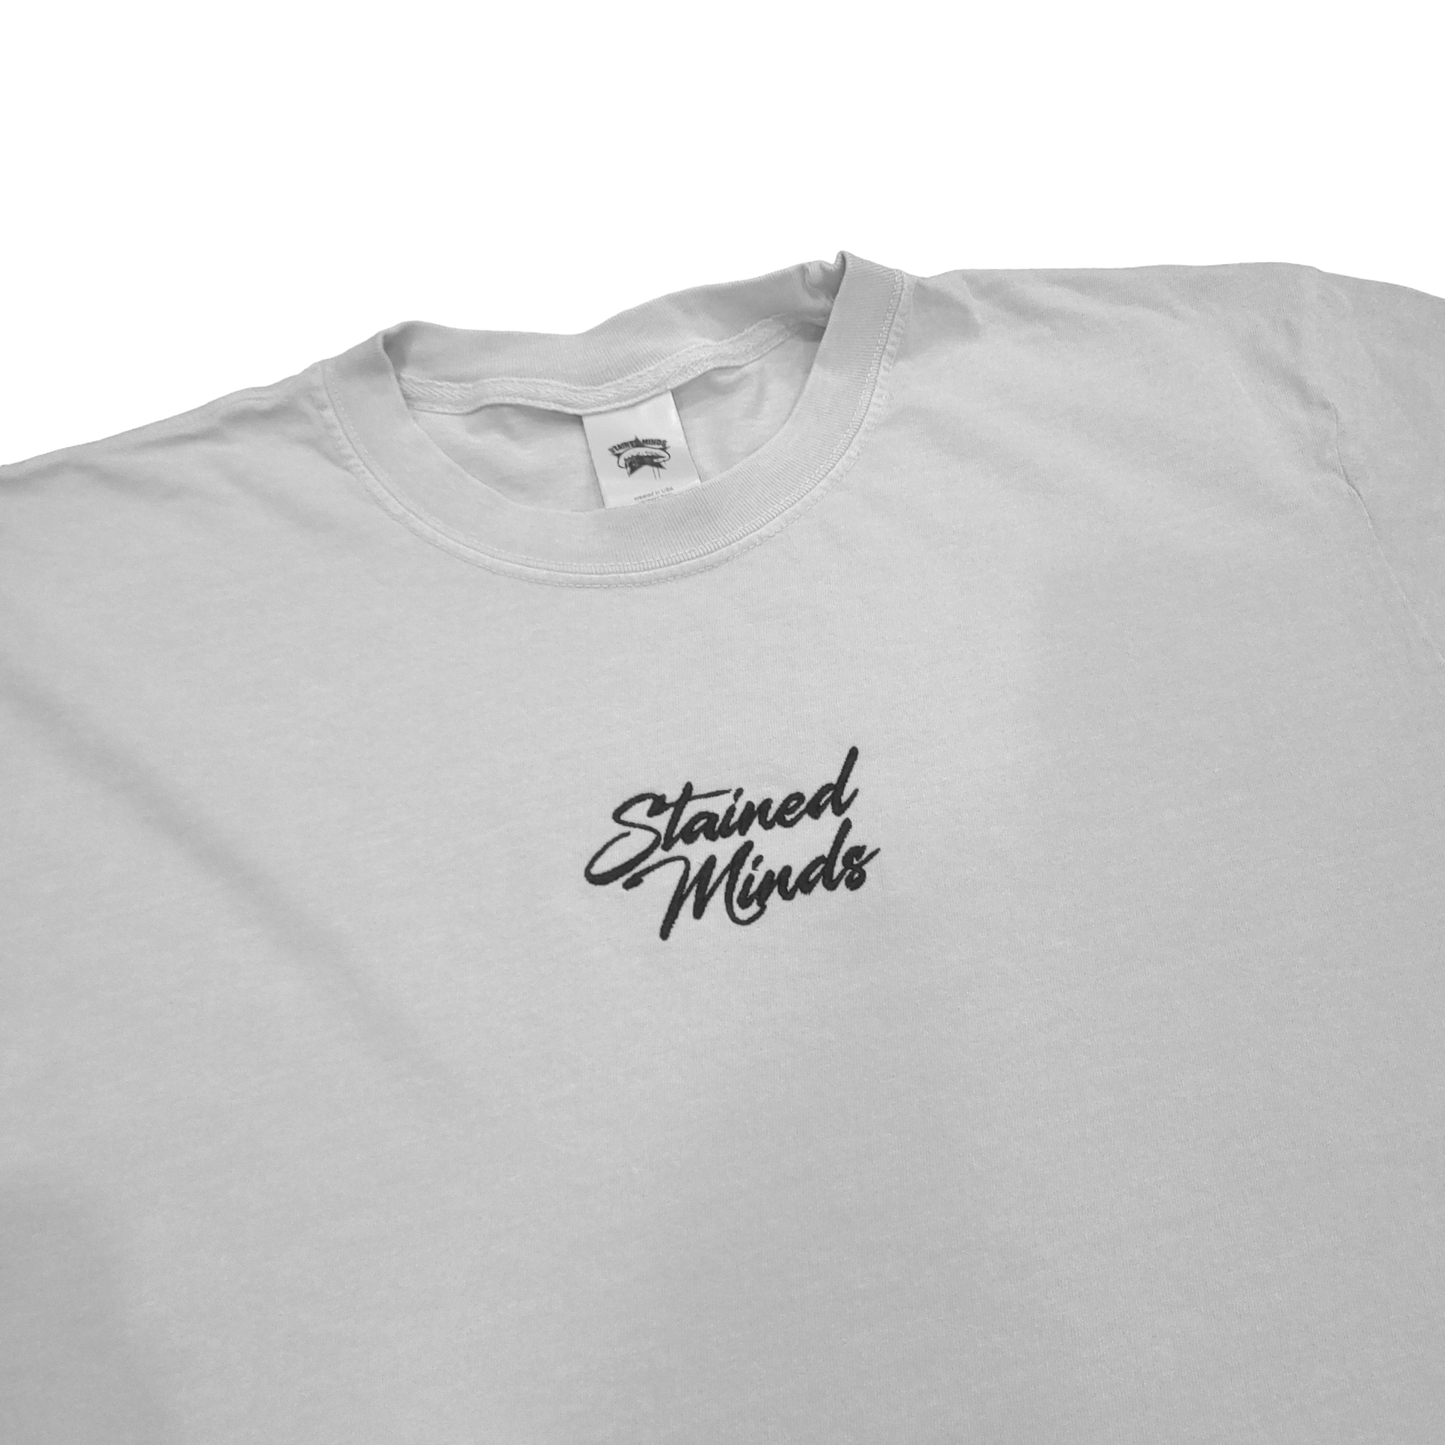 Simple Stainz - "Stained Minds" on a White Tee